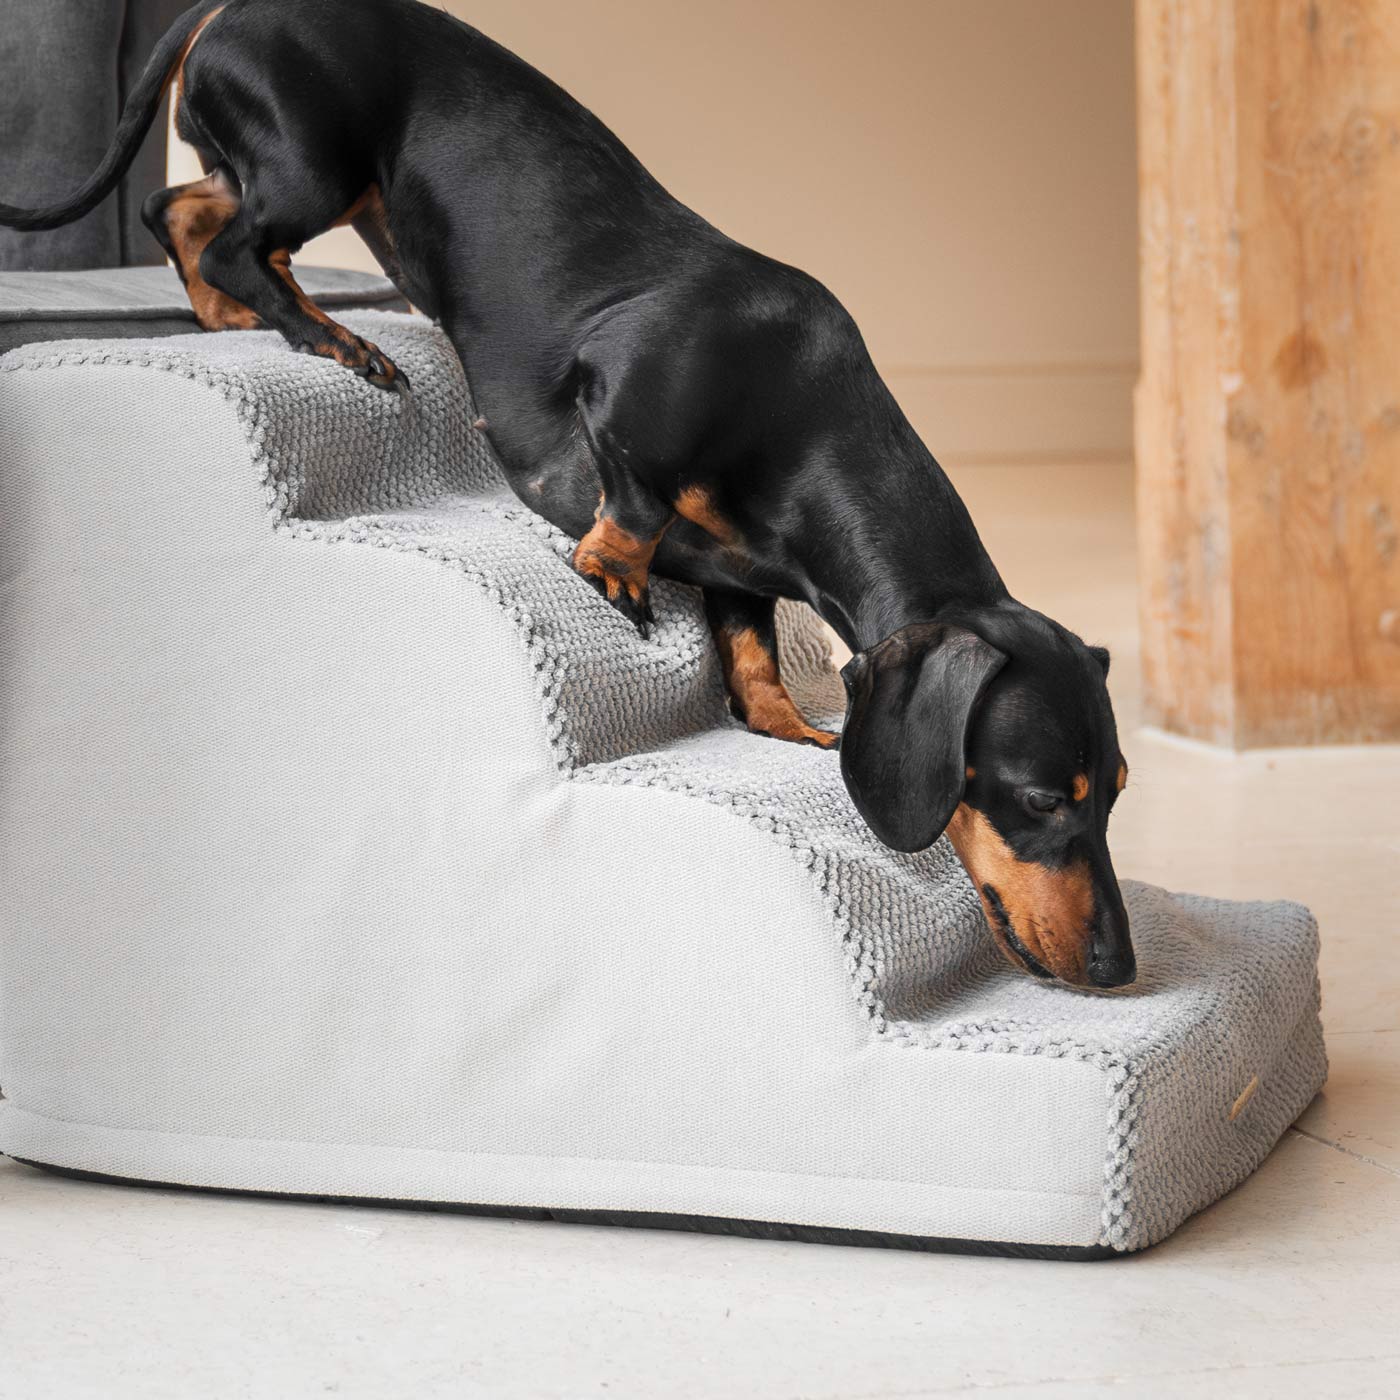 Provide Your Elderly, Young or Injured Pet with The Perfect Pet Furniture Steps, Our Luxury Cloud Pet Steps in Stunning Dove Gray Is the Ideal Choice for Dogs & Cats of All Ages! Pet Steps & Stairs Available Now at Lords & Labradors US